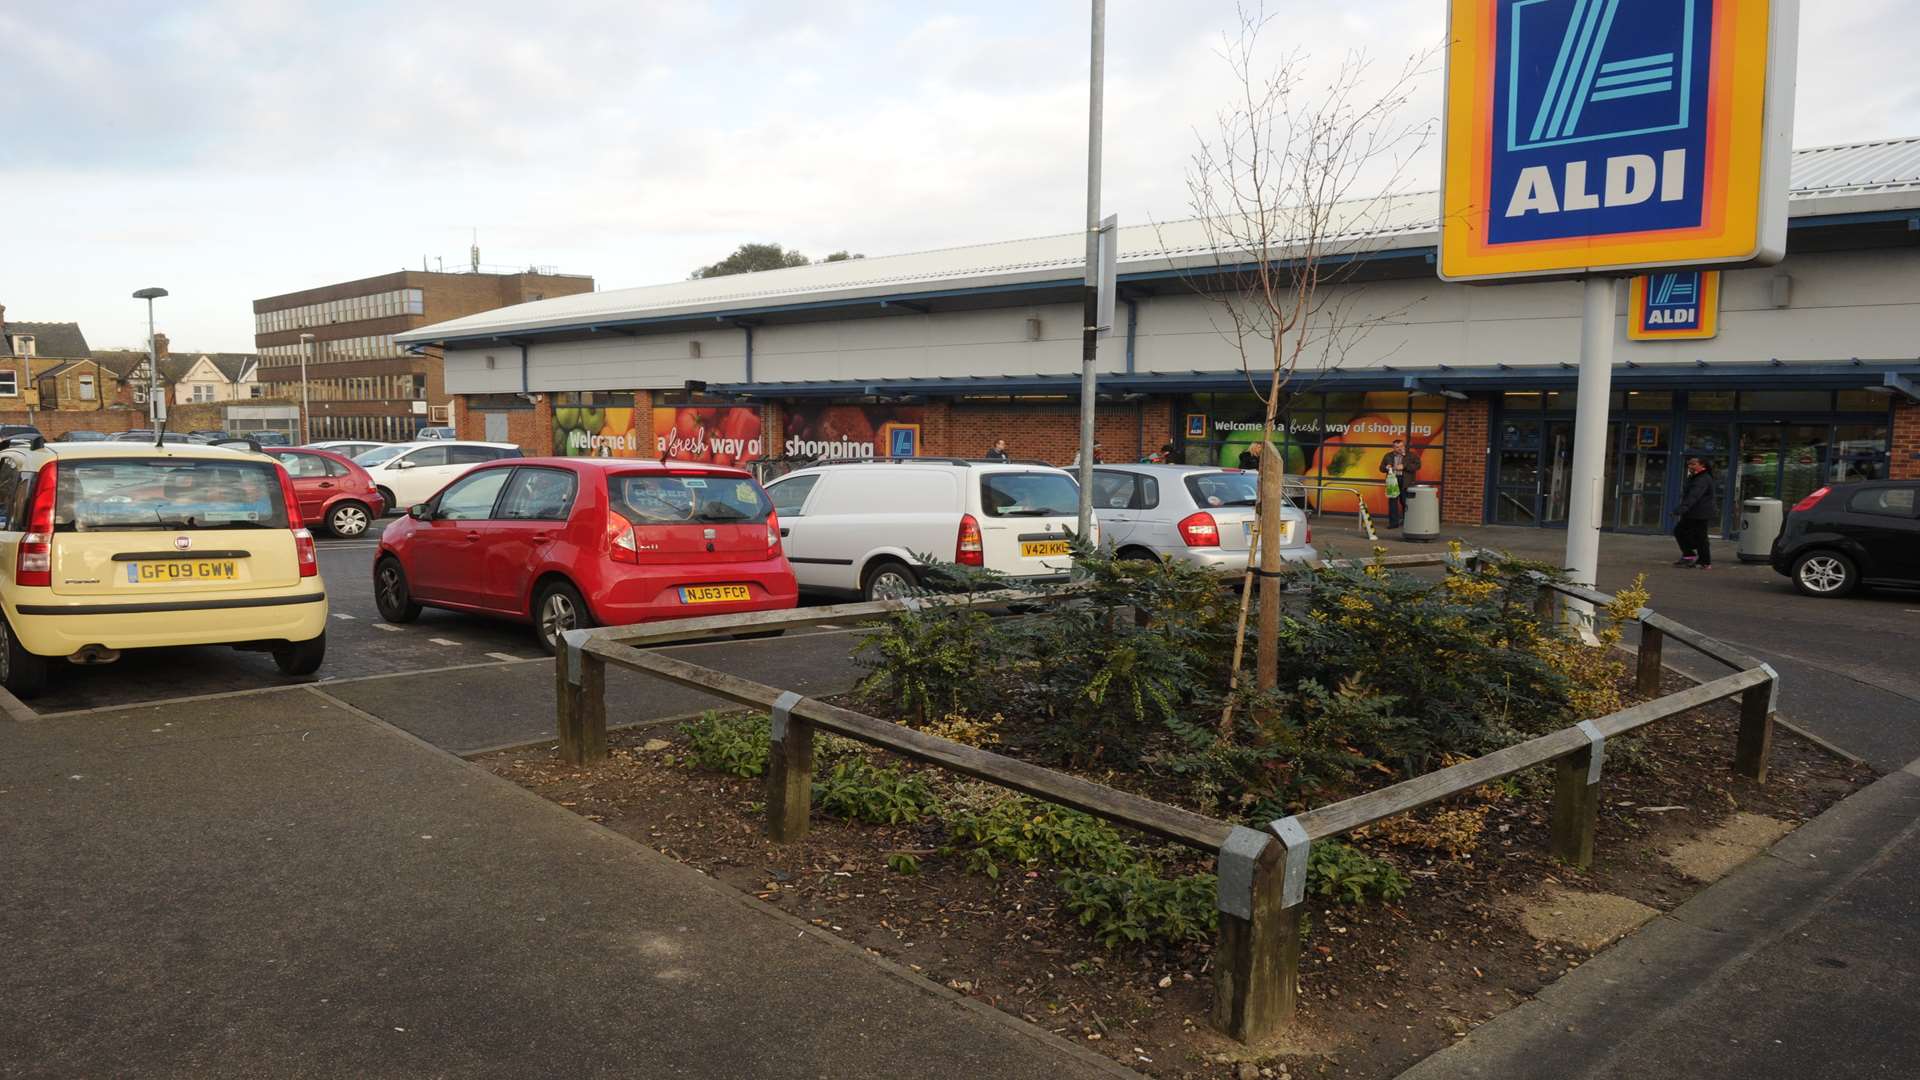 The couple were attacked in the Aldi car park in Duncan Road